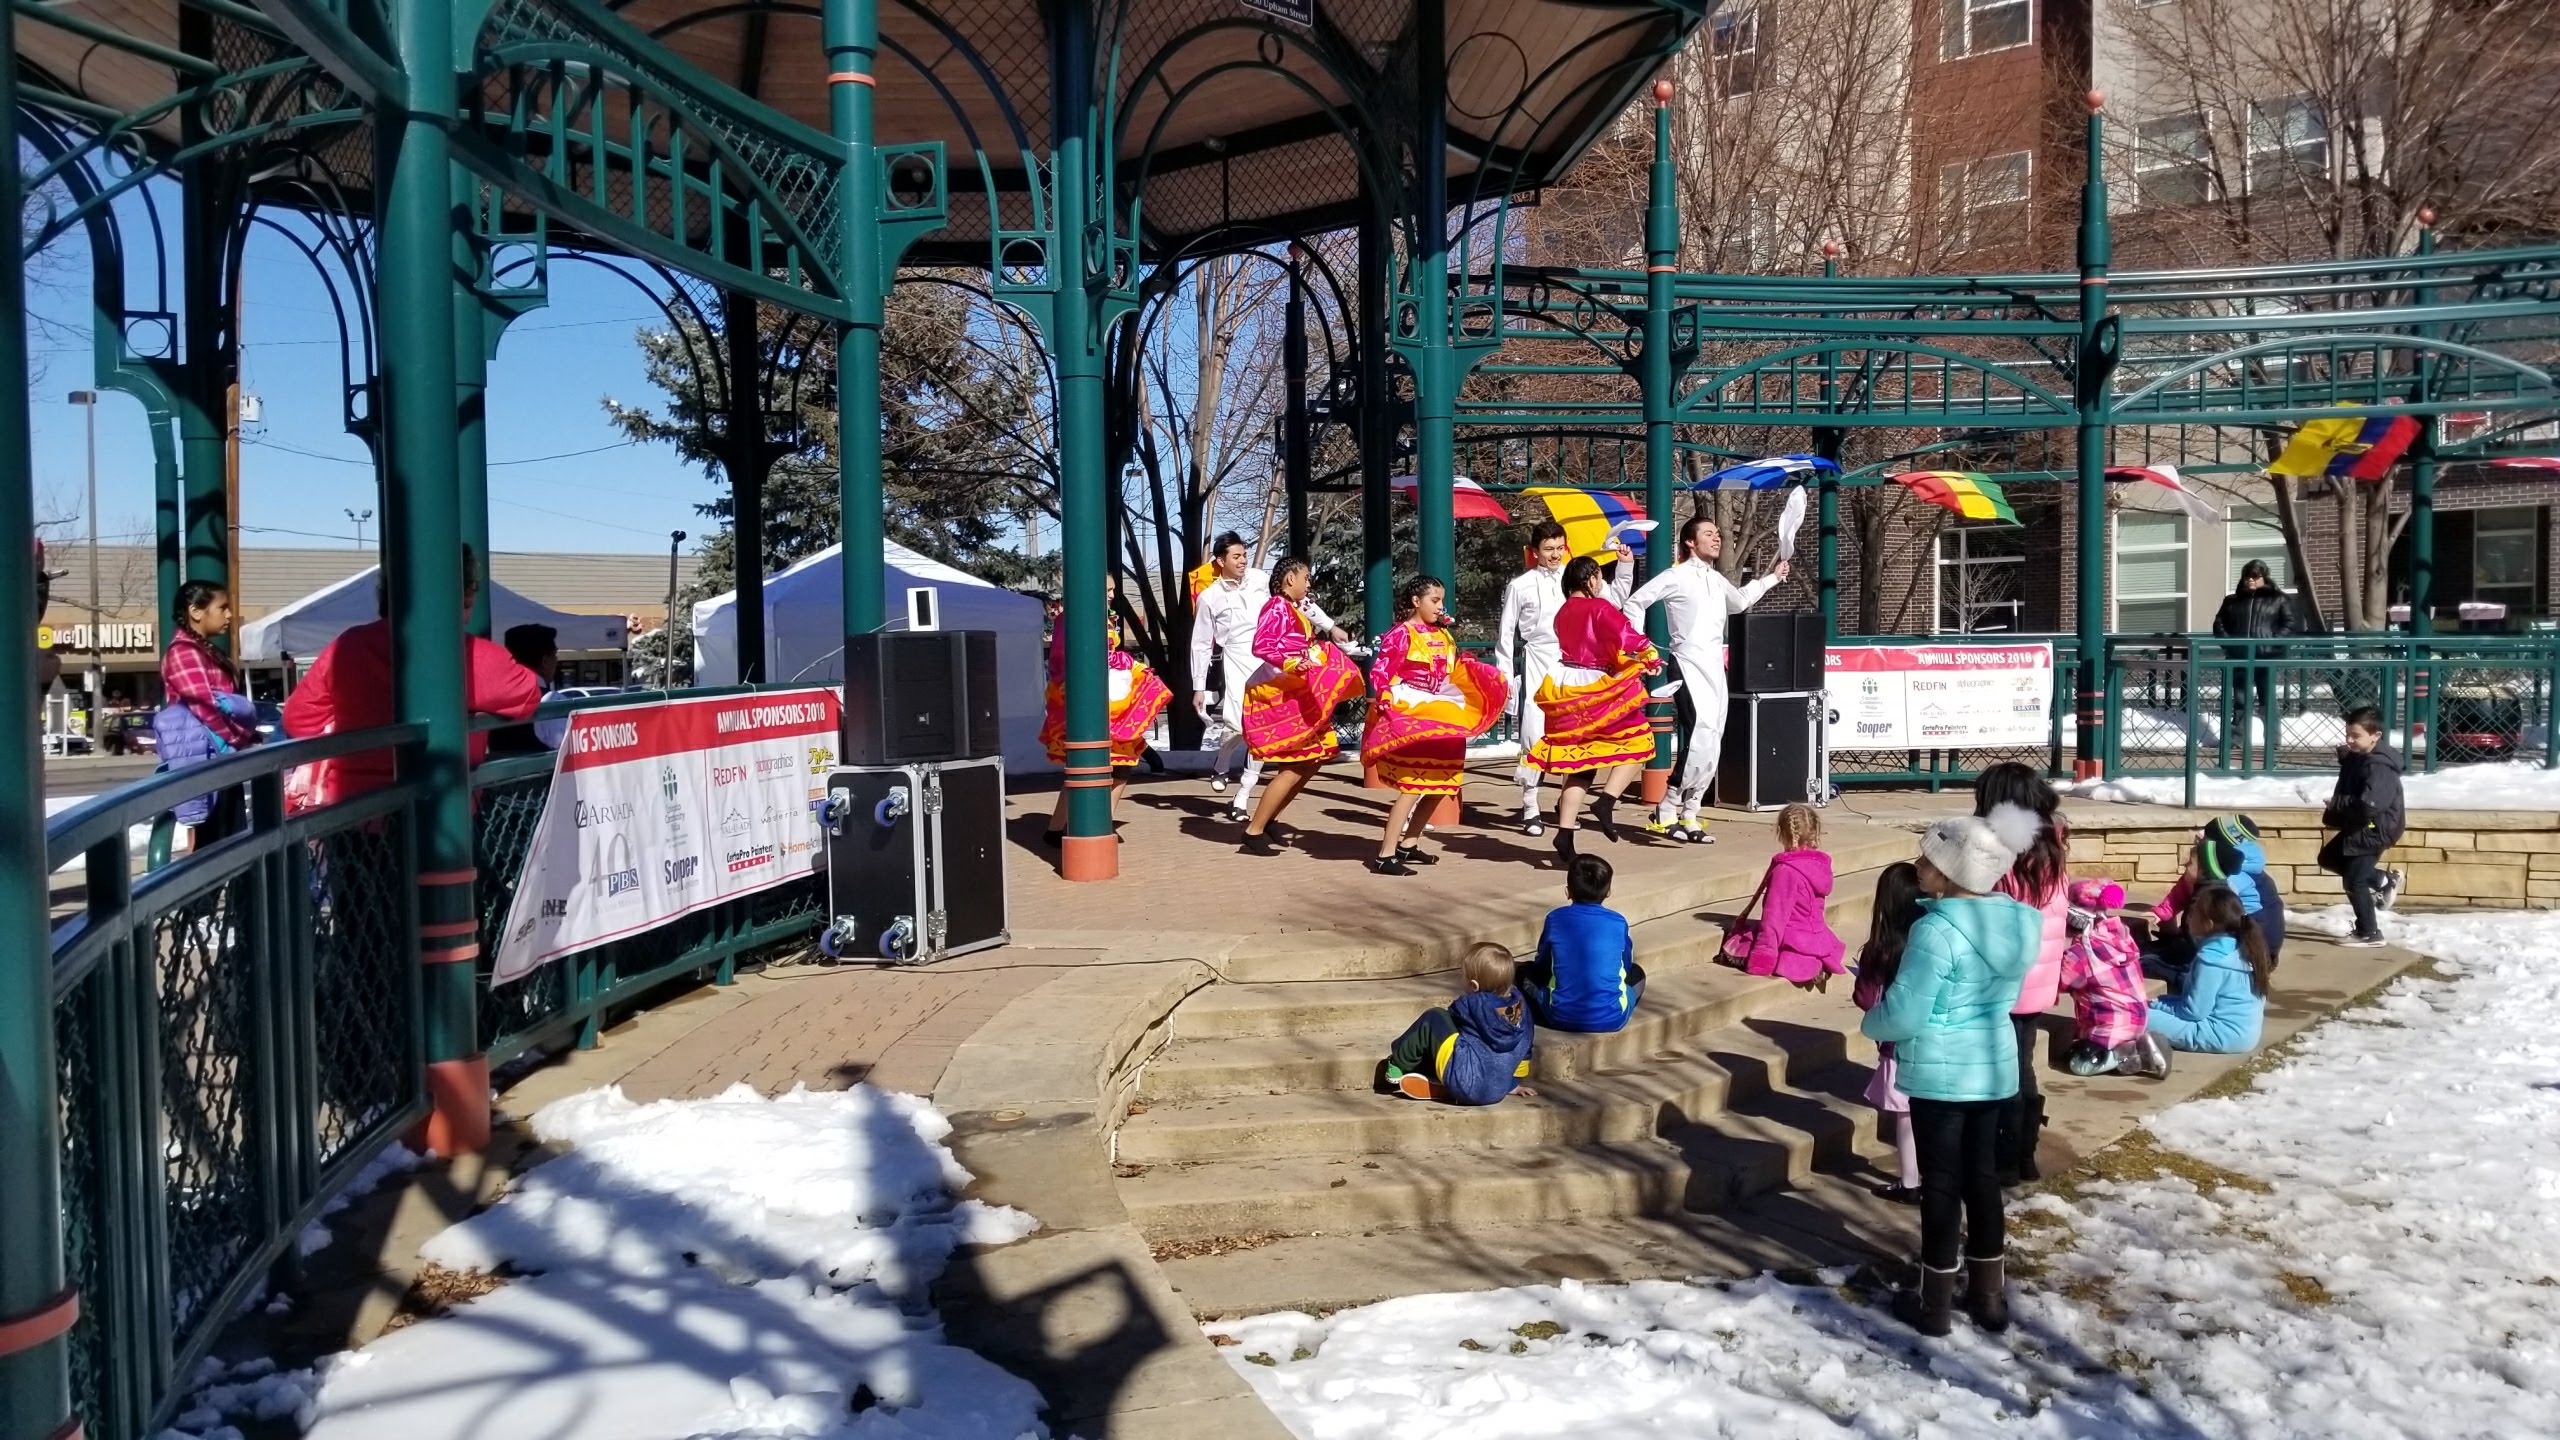 Taking Care of Your Health in Winter | By Carol Cheung, Arvada Festivals Commission